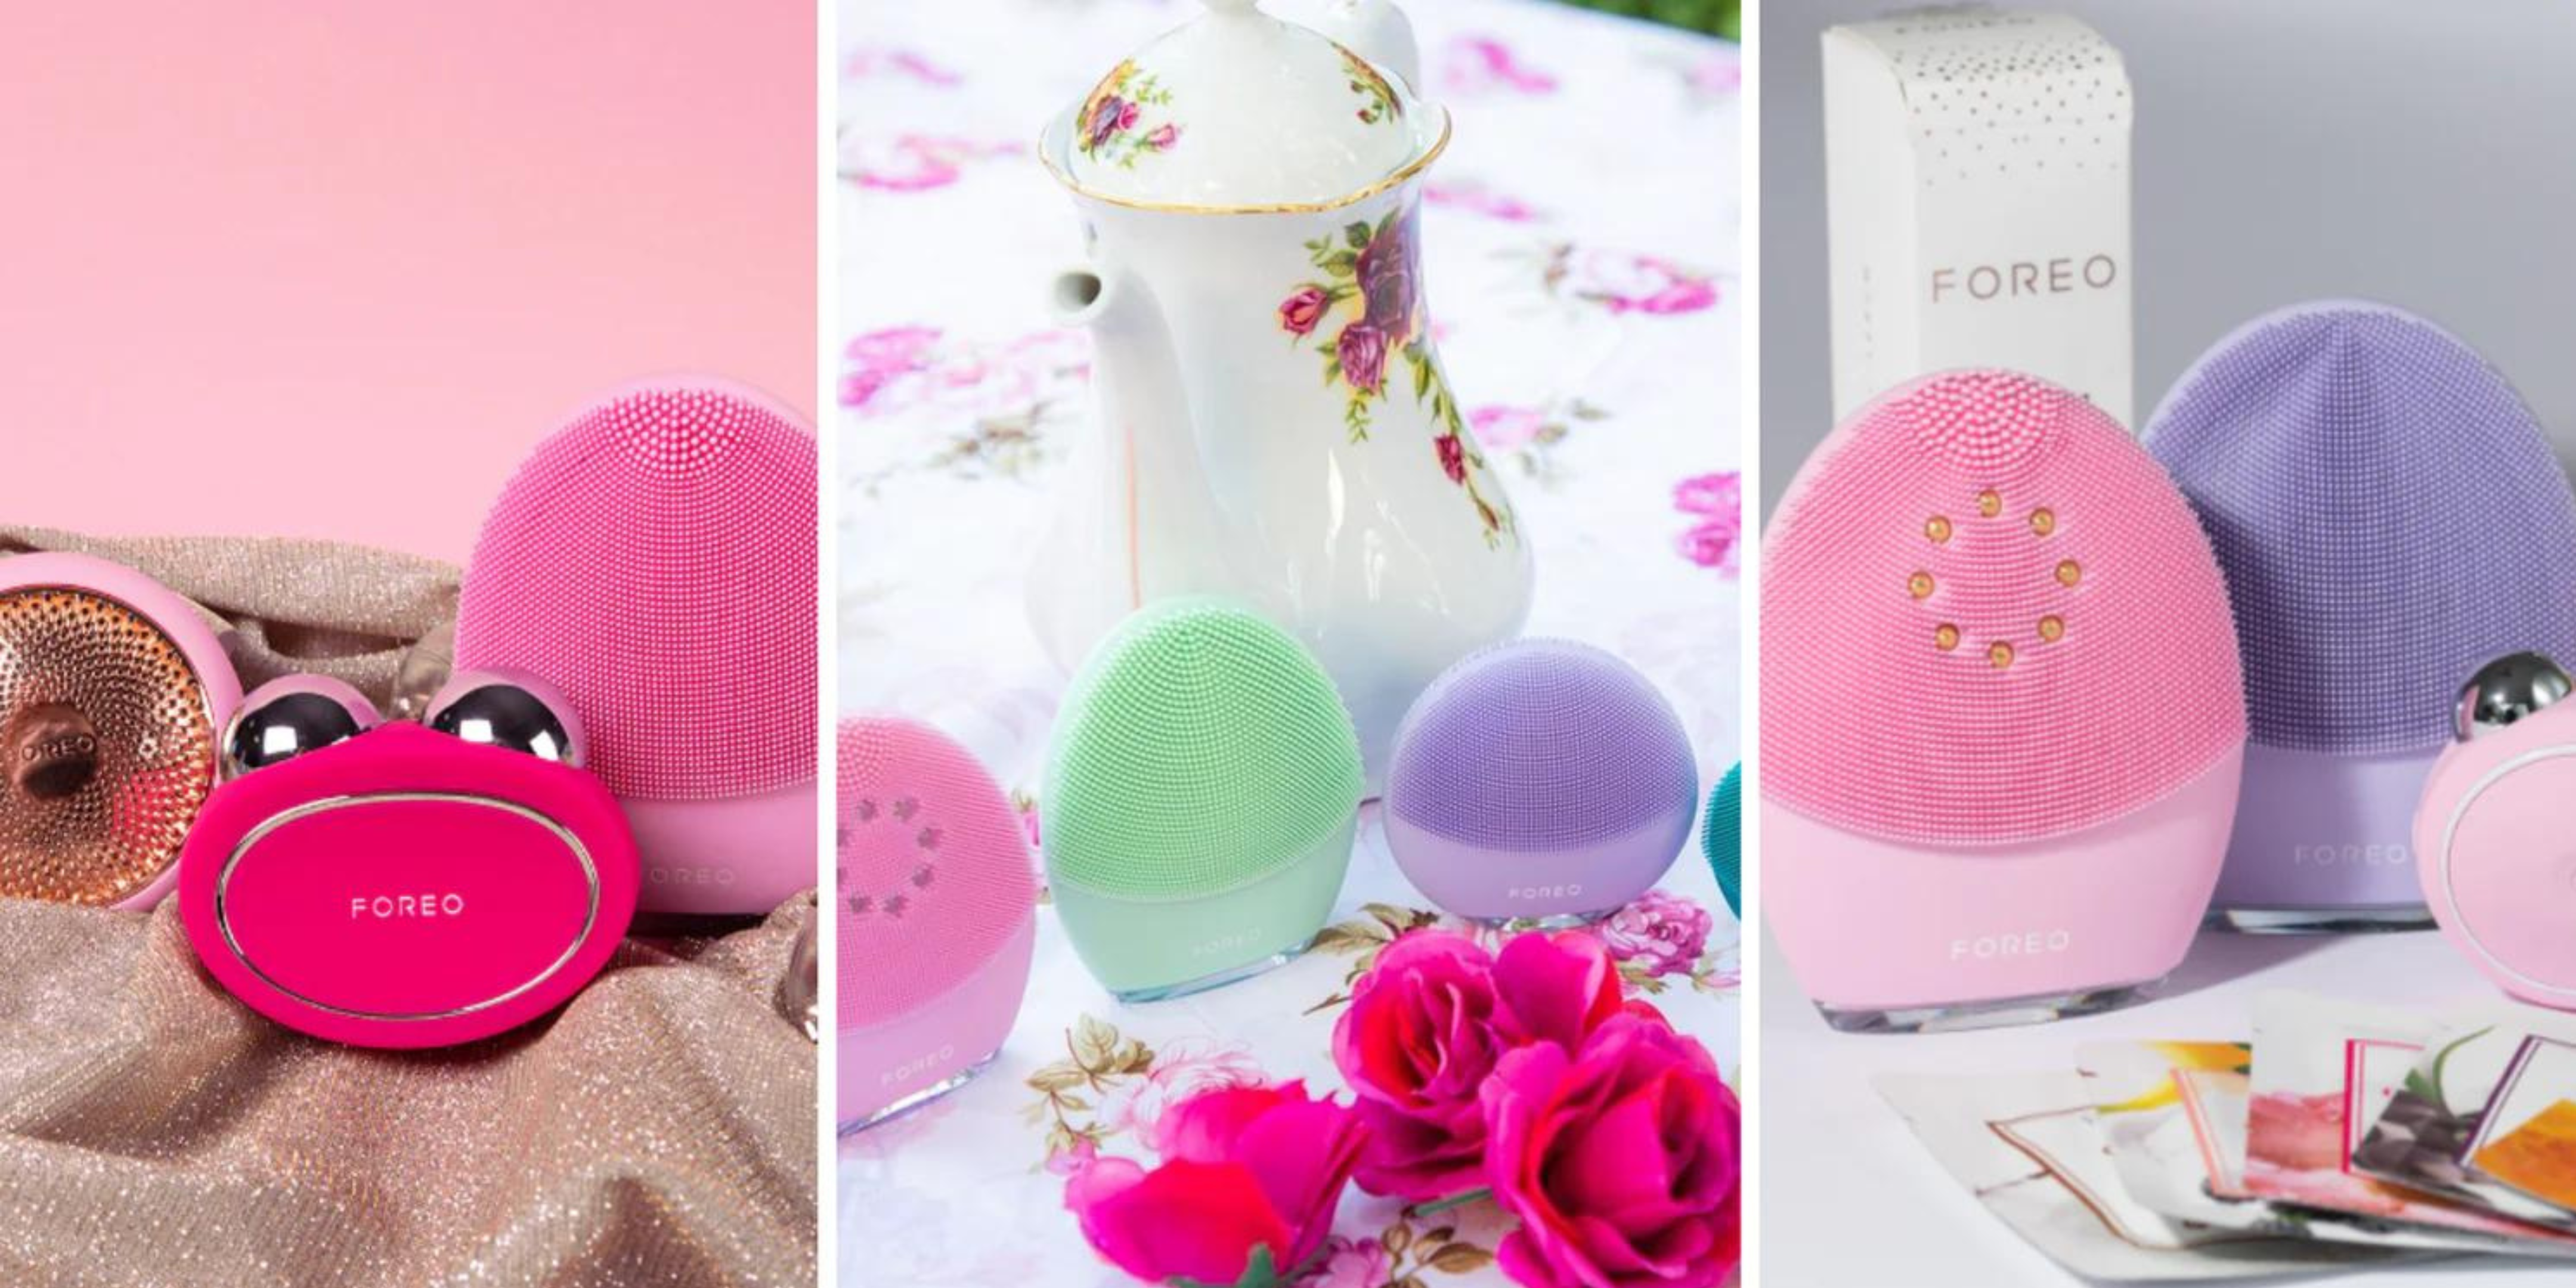 Foreo Skincare Products